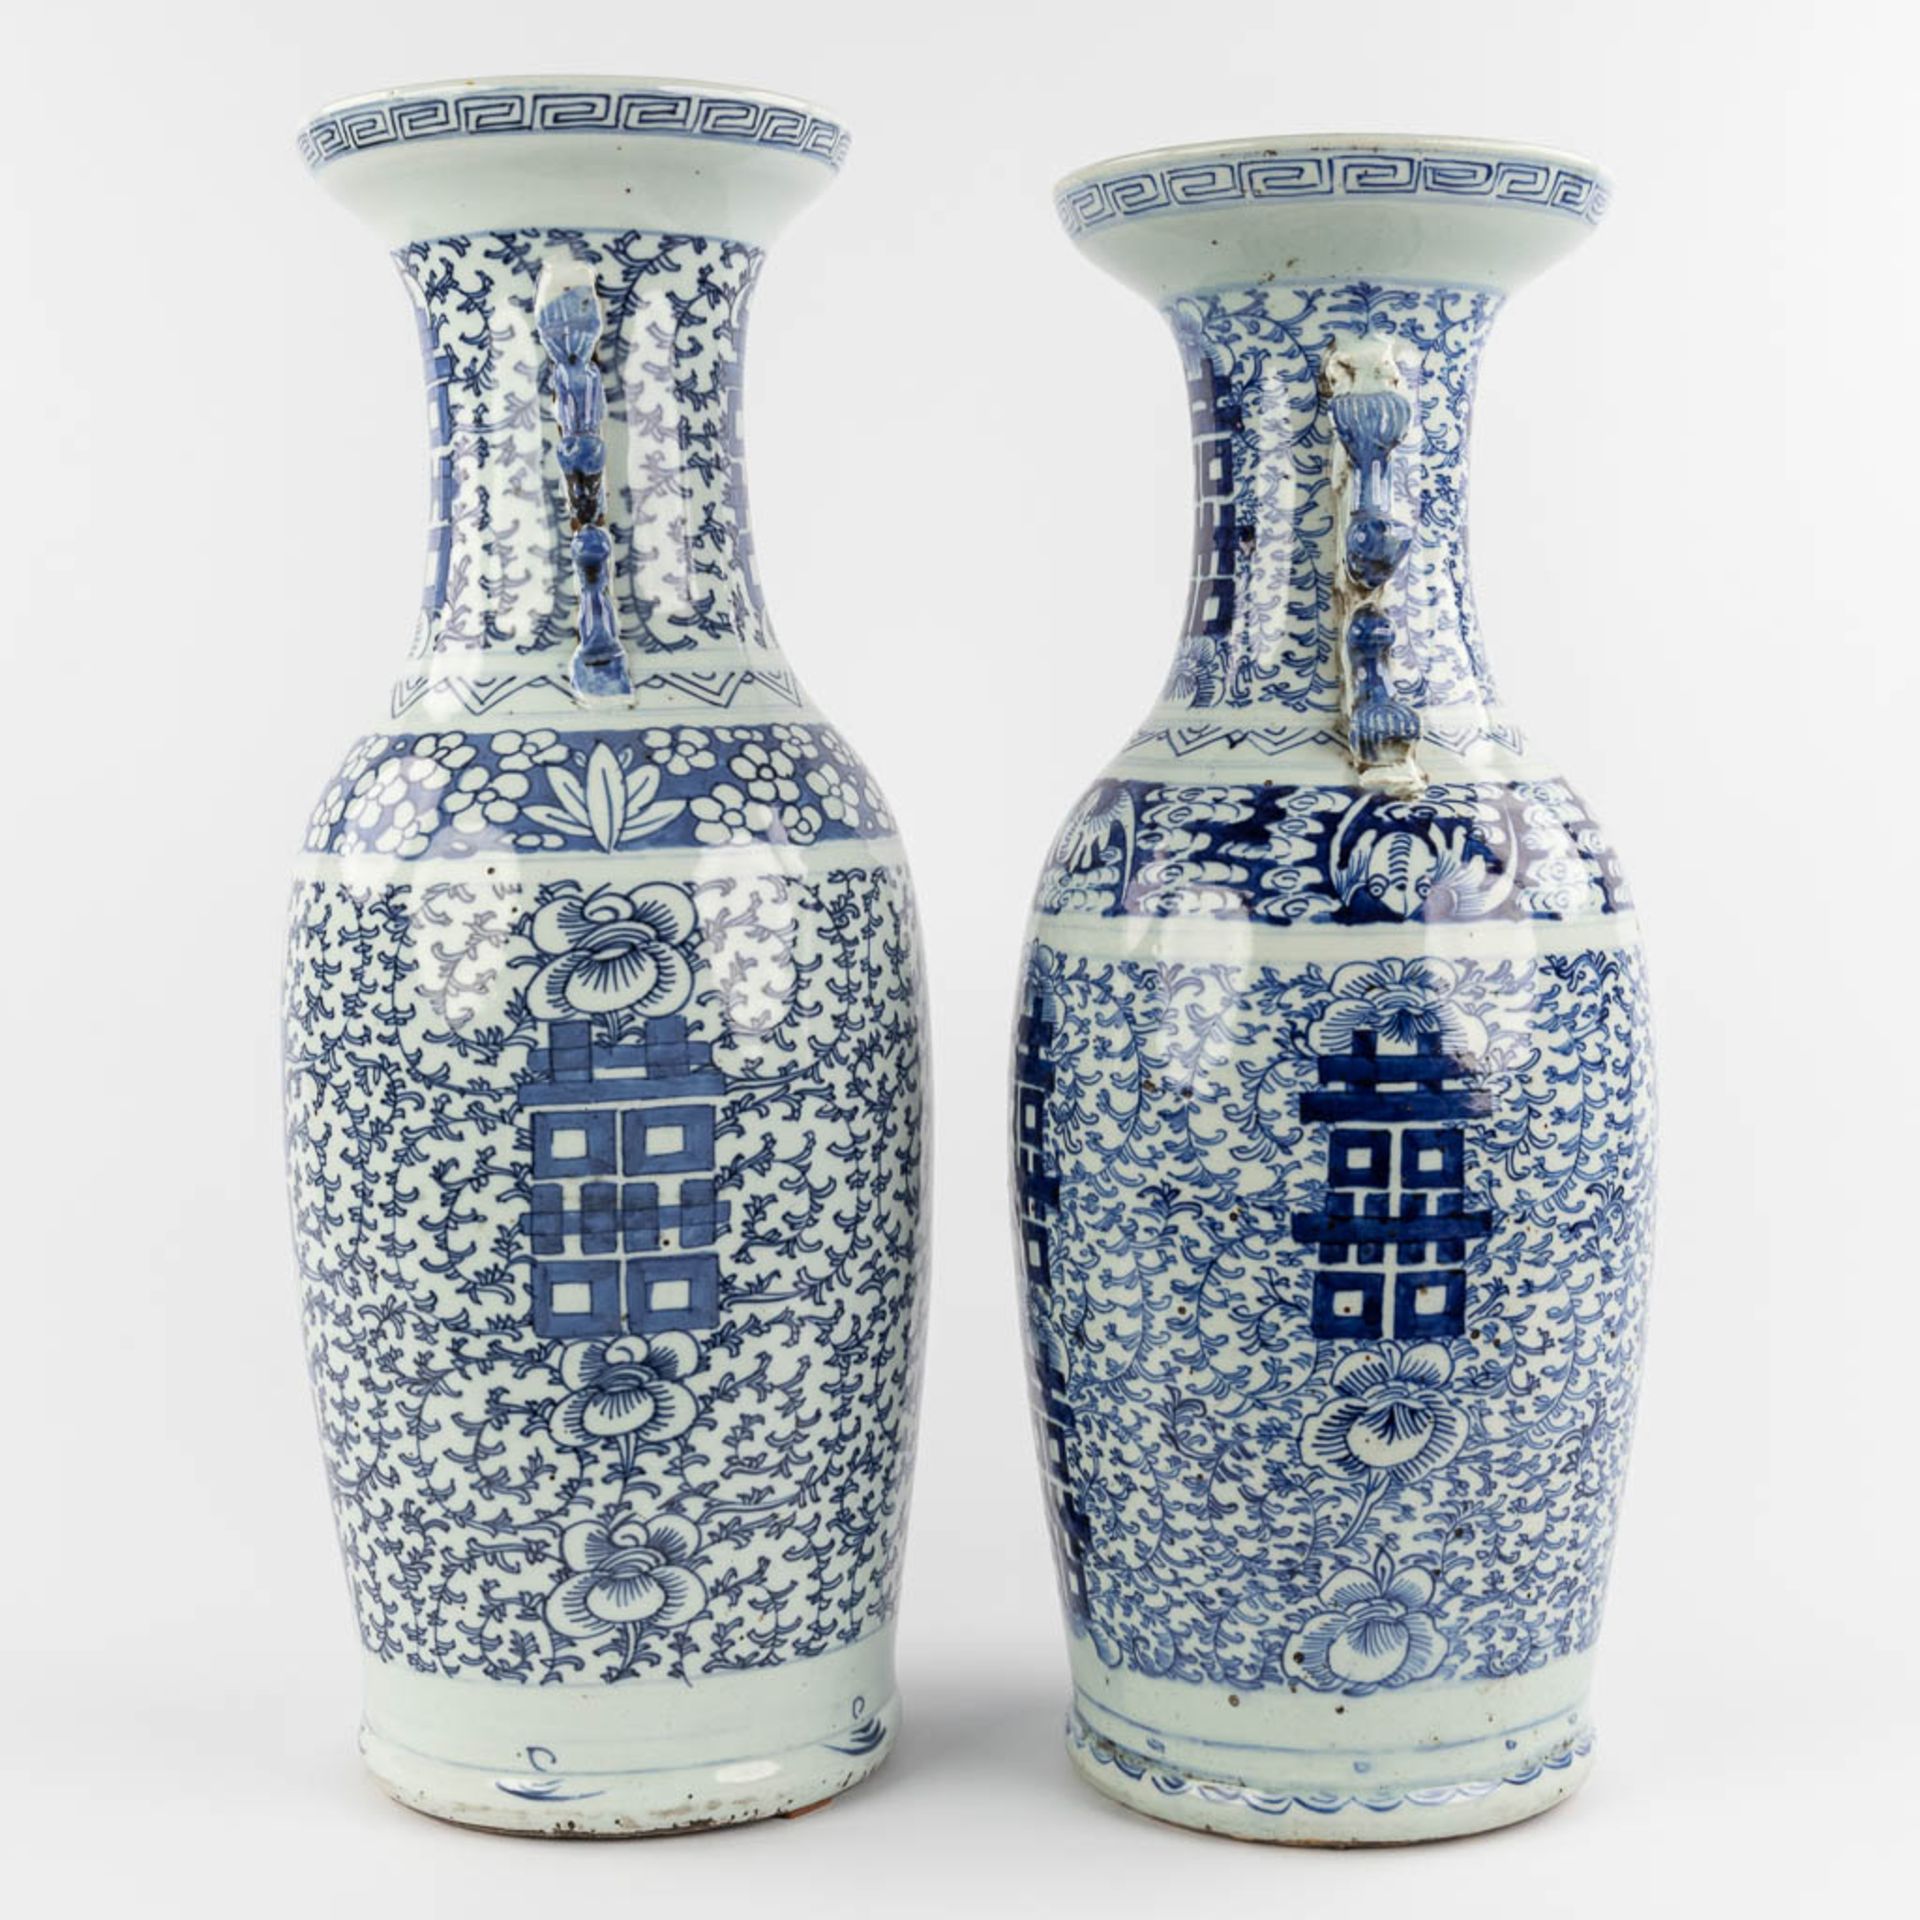 Two Chinese vases with blue-white double xi-sign of happiness. 19th/20th C. (H:60 x D:21 cm) - Image 4 of 12